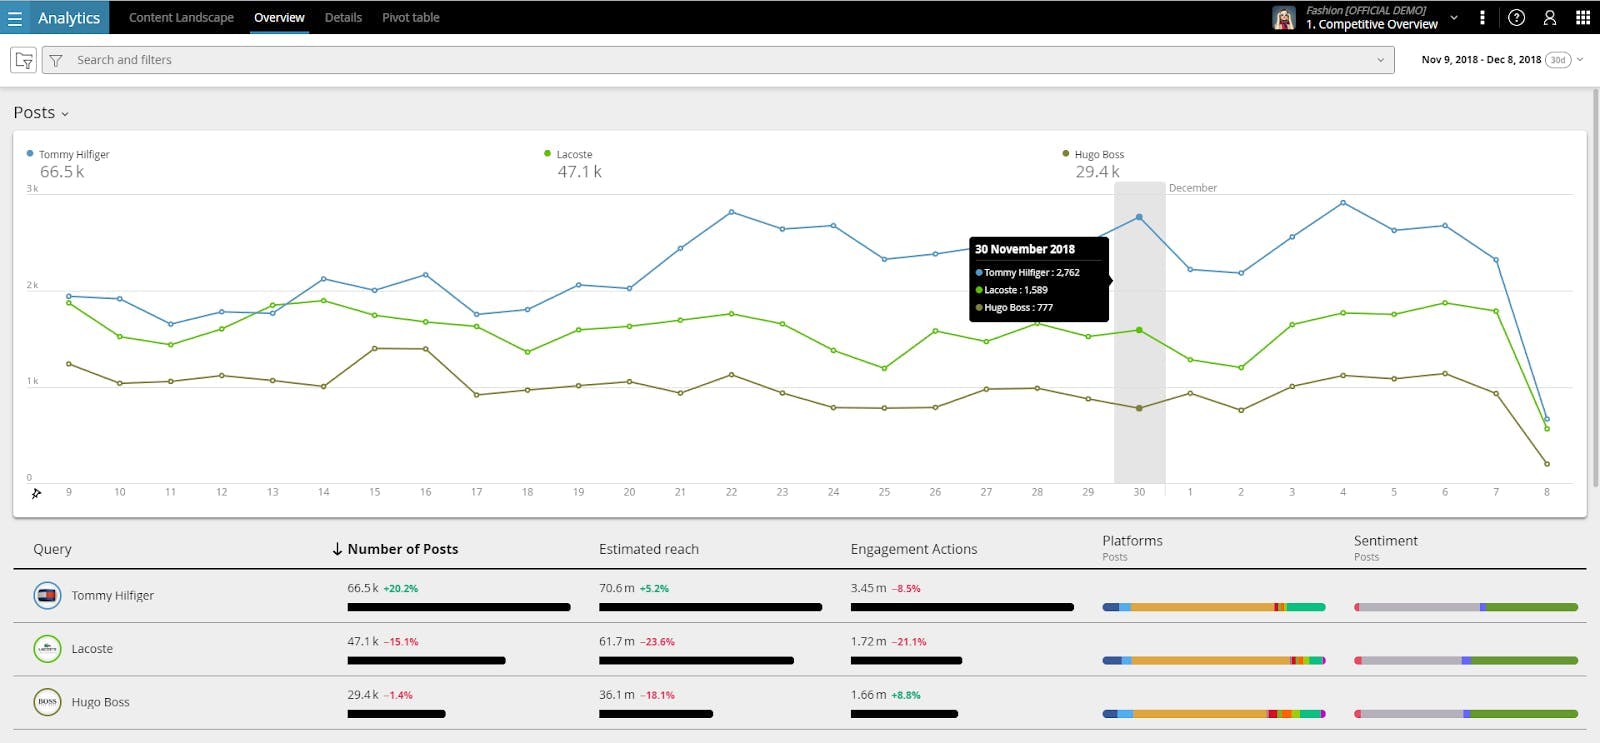 Meltwater Radarly Retails customer experience dashboard